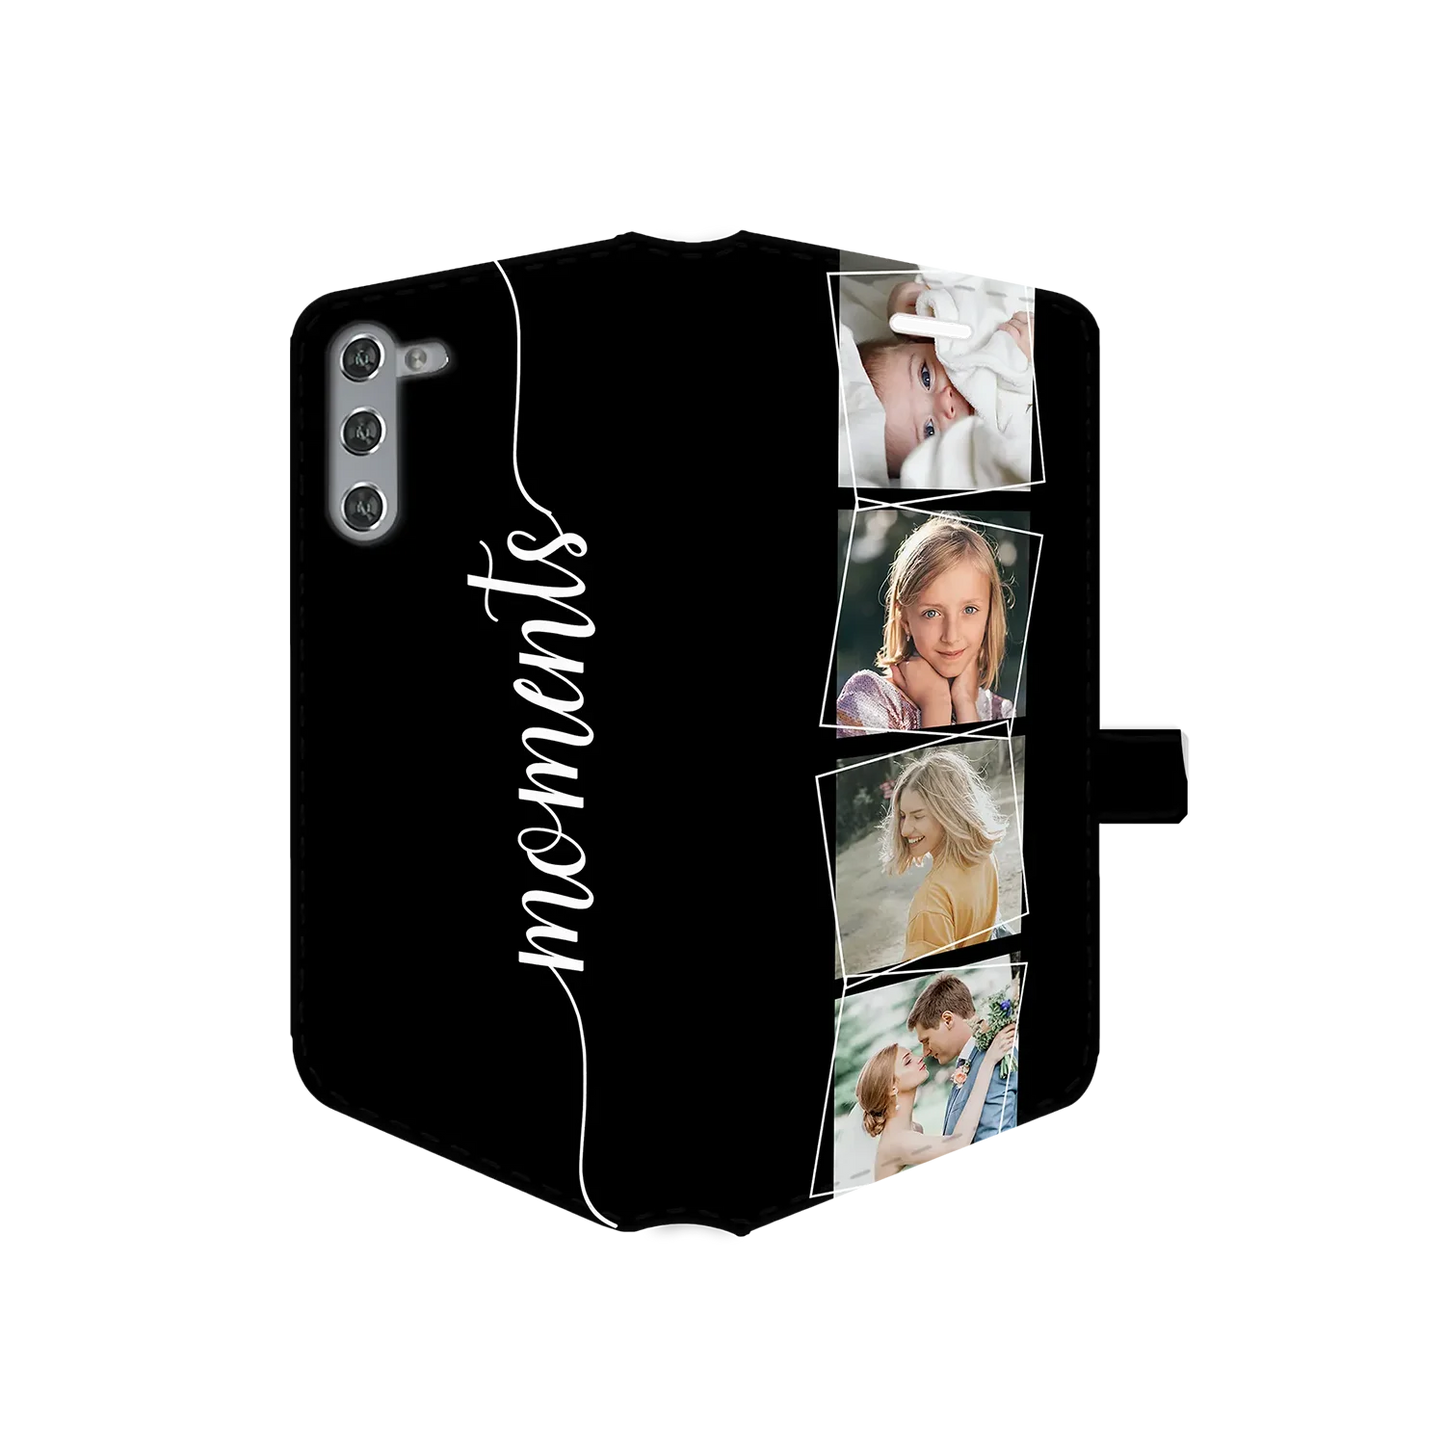 Moments - Coque Galaxy S personnalisée